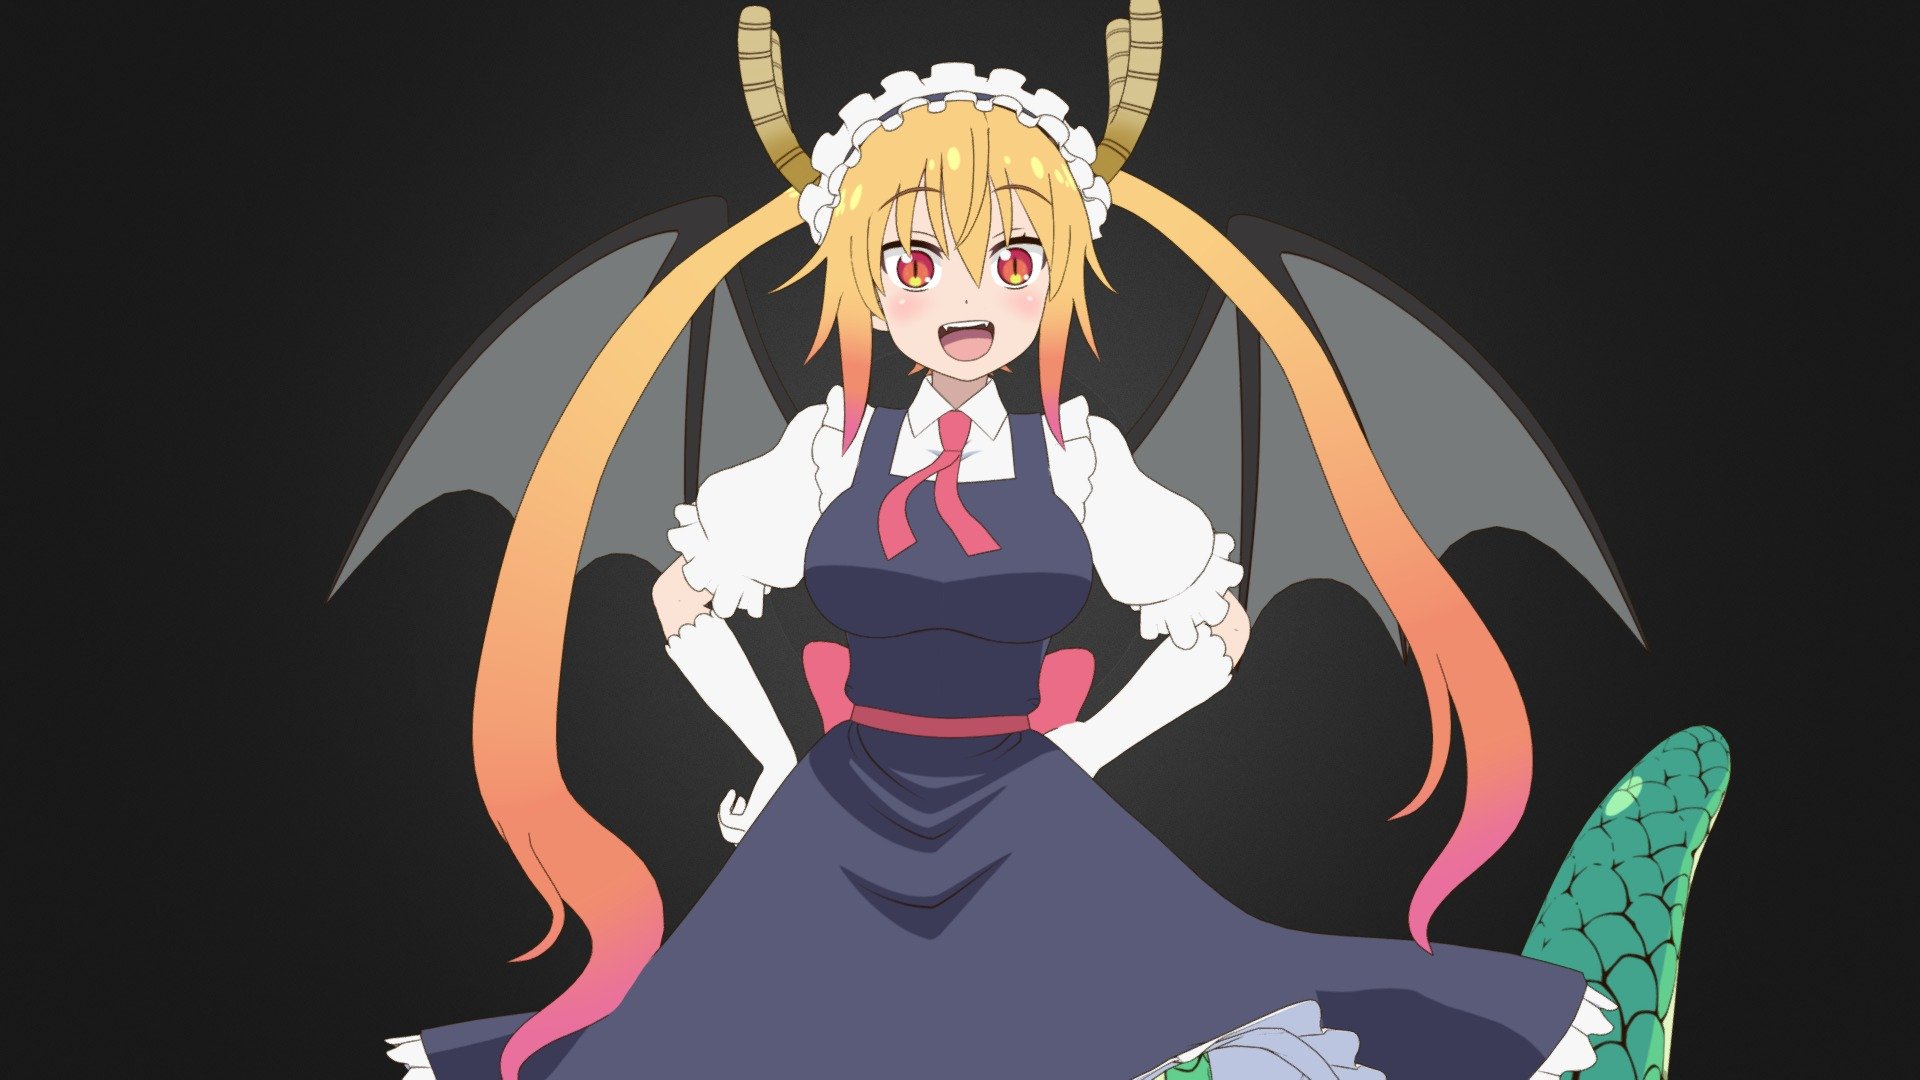 Tohru, character from the anime Miss Kobayashi's Dragon Maid.

3D Model Rigged. With Shape Keys. In blend format, for Blender V3.6 or higher. EEVEE renderer, with nodes, material Toon Shader.

▬▬▬▬▬▬▬▬▬▬▬▬▬▬▬▬▬▬▬▬▬▬▬▬▬▬▬▬▬▬▬▬▬▬▬▬▬▬▬▬▬▬▬▬▬▬

Buy Artstation: https://www.artstation.com/a/33116256

Buy CGTrader: https://bit.ly/3ResUxe

▬▬▬▬▬▬▬▬▬▬▬▬▬▬▬▬▬▬▬▬▬▬▬▬▬▬▬▬▬▬▬▬▬▬▬▬▬▬▬▬▬▬▬▬▬▬

Contents of the .ZIP file:

● Folder with all textures in .tga Format.

● .blend file with the complete 3D Model.

Contents of the .blend file:

● Full Body, no deleted parts.

● Individual Hair, separated from the body.

● Pieces of clothing, separated from the body. (Individuals, Can be removed (except the socks))

● Complete RIG, with all bones for movement. (Metarig Rigify Armature)

● Shape Keys.

● Materials configured with nodes.

● UV mapping.

● Textures embedded in the .blend file.

● Modifiers. (Subdivide, Solidify and Outline for contours) - Tohru - Dragonmaid - 3D model by GilsonAnimes (@Gilson.Animes) 3d model